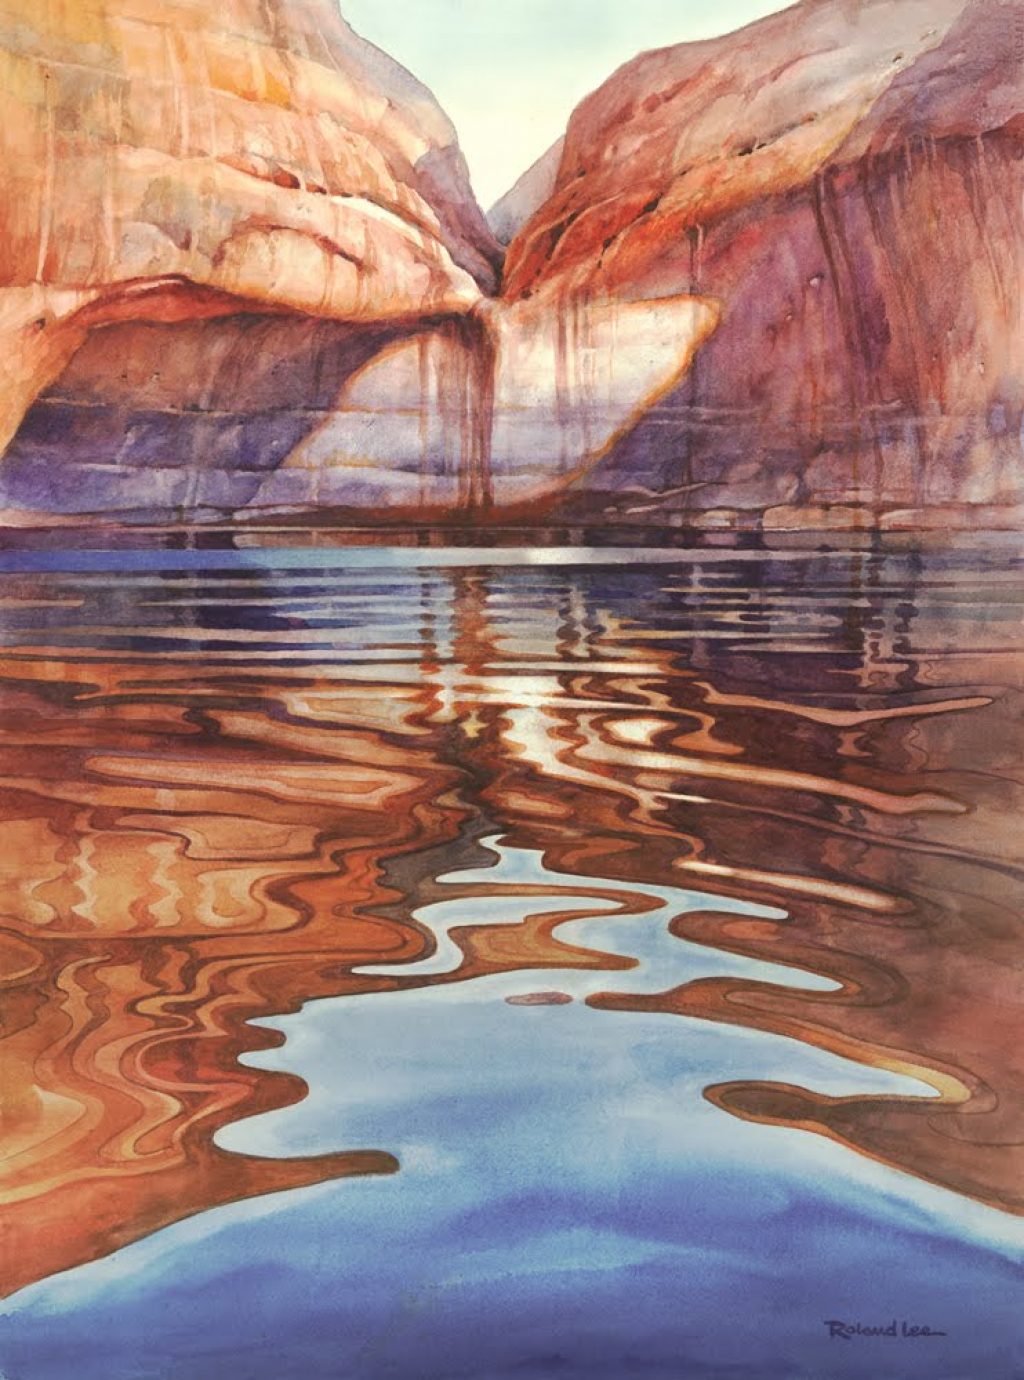 How to Paint texture in rocks and cliffs and reflections of Lake Powell